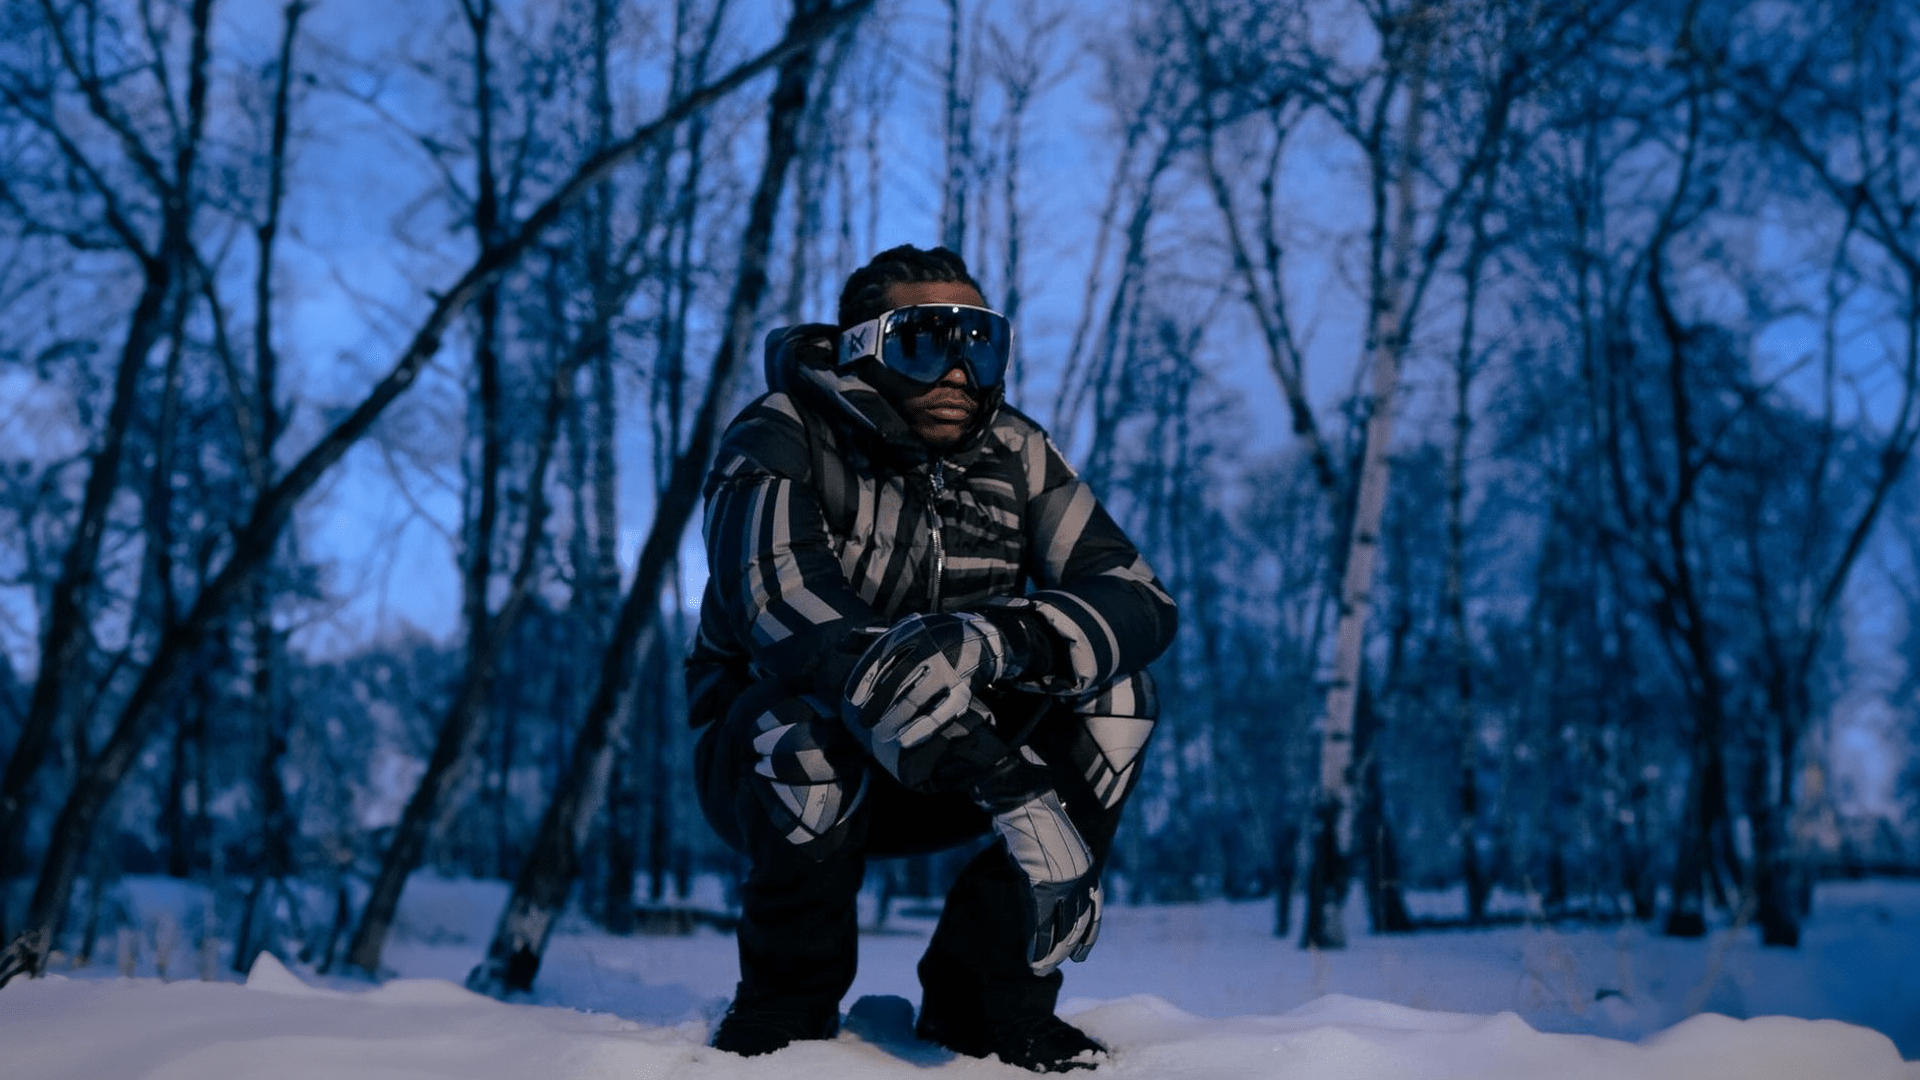 Gunna Confesses The Success Is “Bittersweet” In New Single